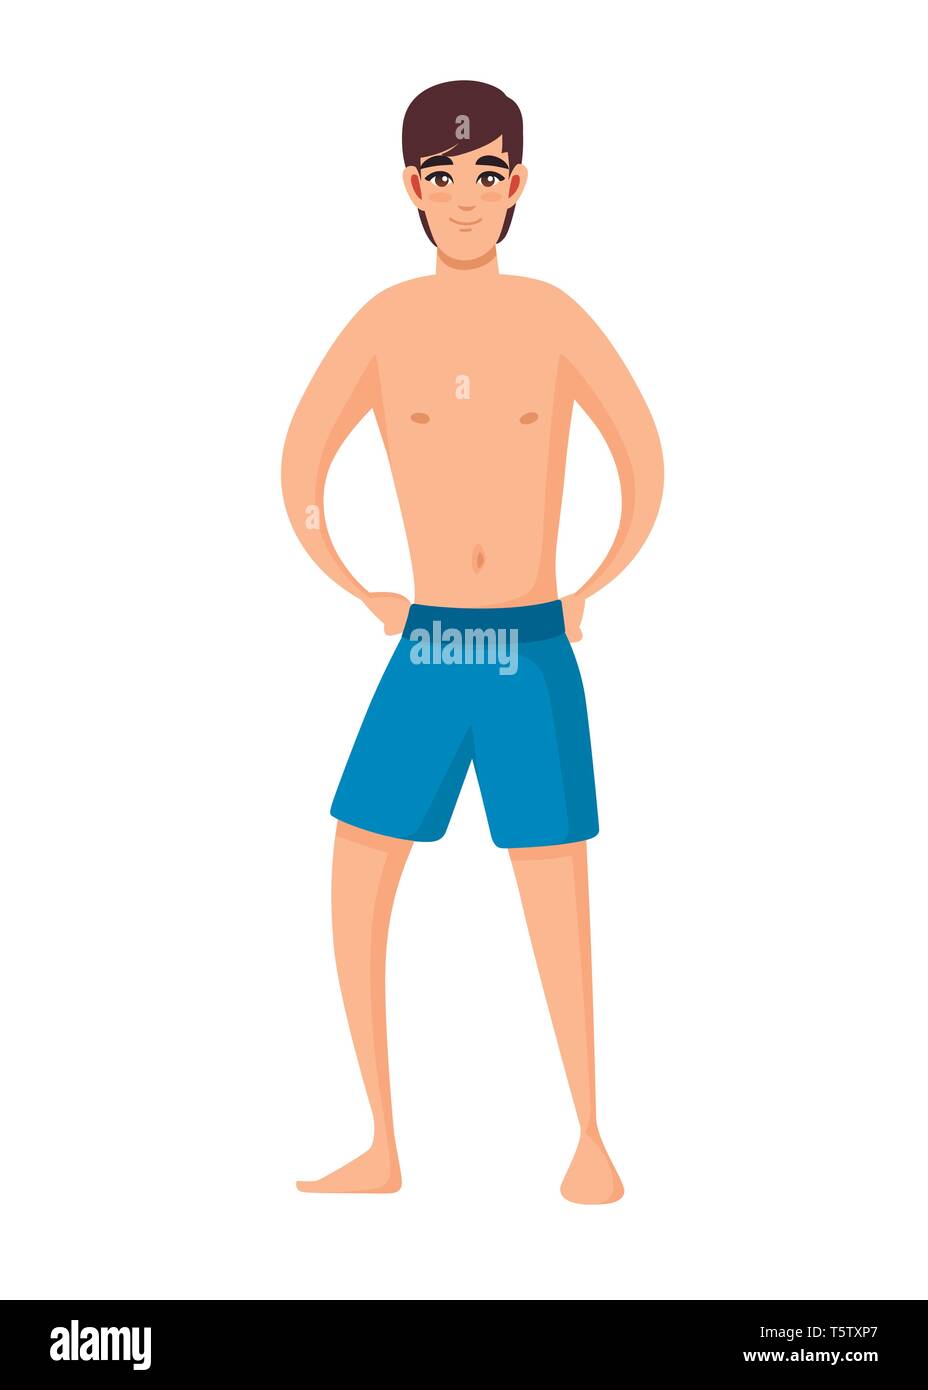 Men wear blue swimsuit. Beach shorts. Cartoon character design. Flat vector illustration isolated on white background. Stock Vector